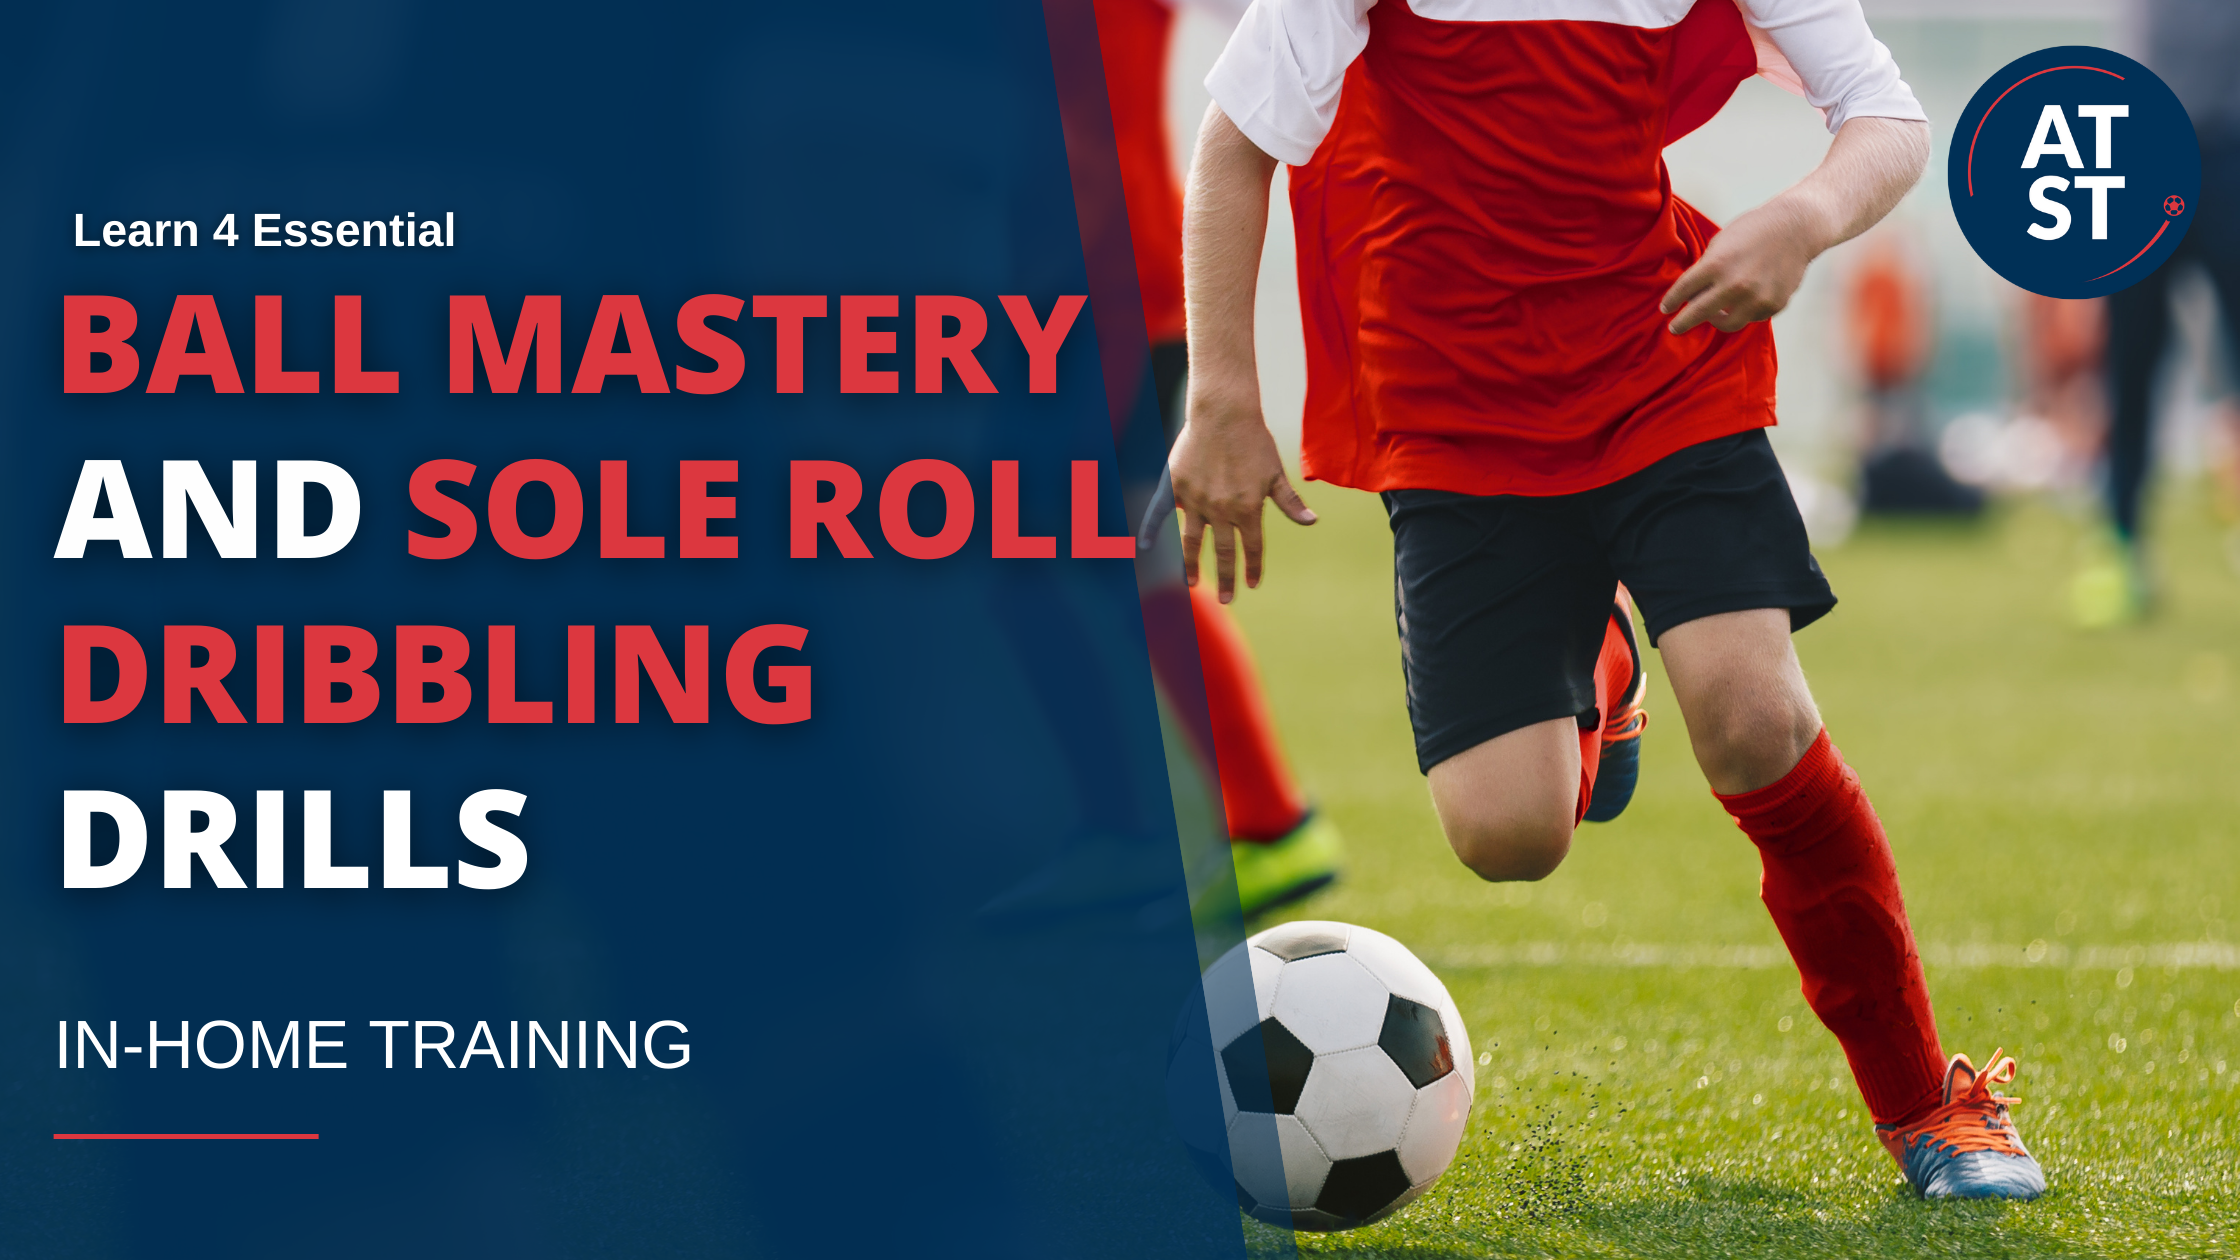 Learn 4 Drills that Mix Ball Mastery & Sole Roll Dribbling